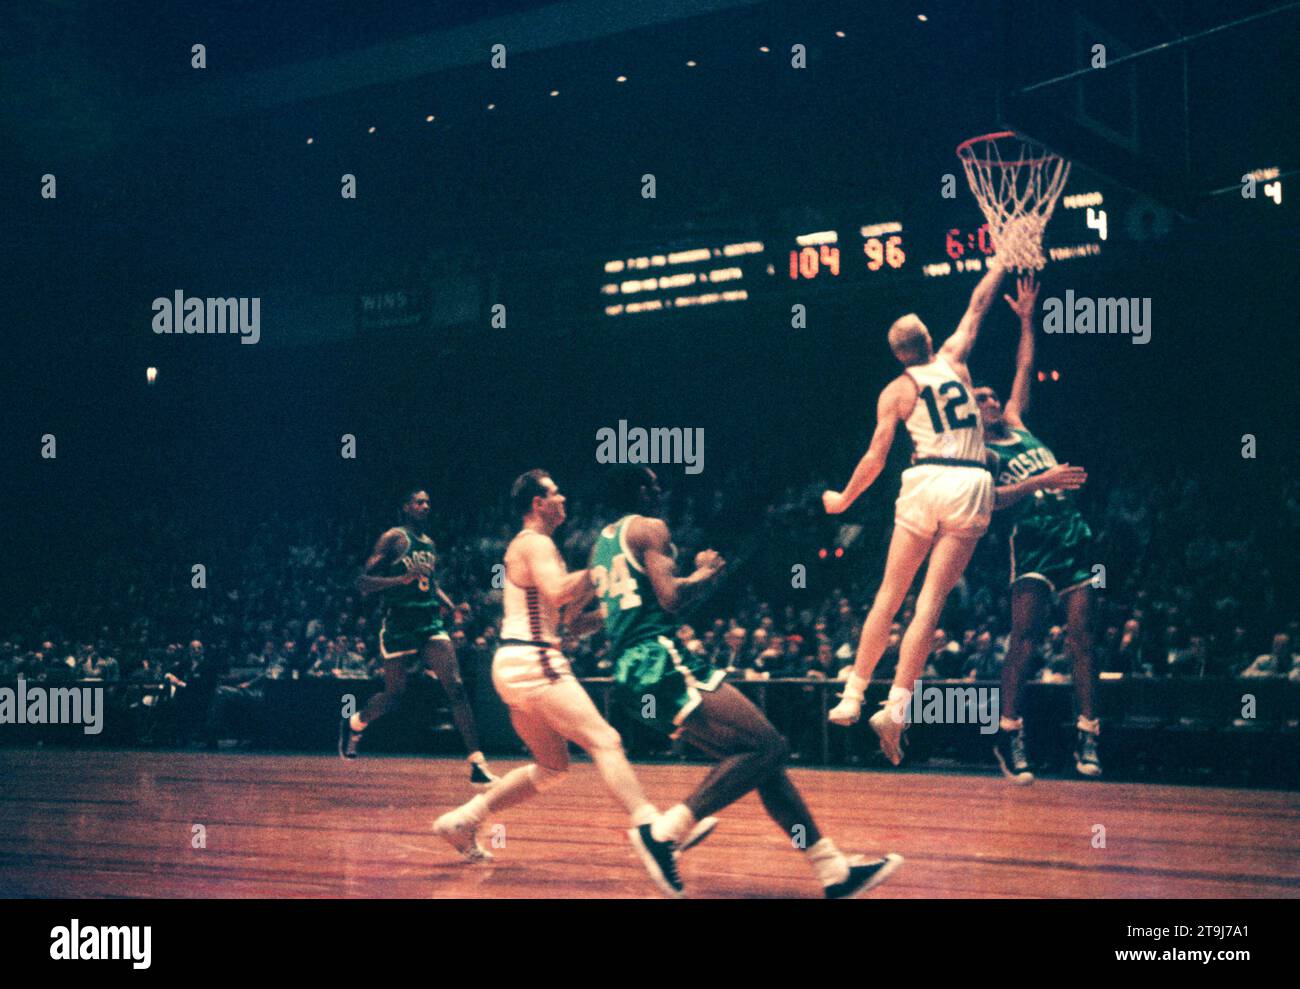 NEW YORK, NY - OCTOBER 25: Bob Cousy #14 of the Boston Celtics shoots over Kenny Sears #12 of the New York Knicks during an NBA game on October 25, 1958 at the Madison Square Garden in New York, New York.  (Photo by Hy Peskin) *** Local Caption *** Bob Cousy;Kenny Sears Stock Photo